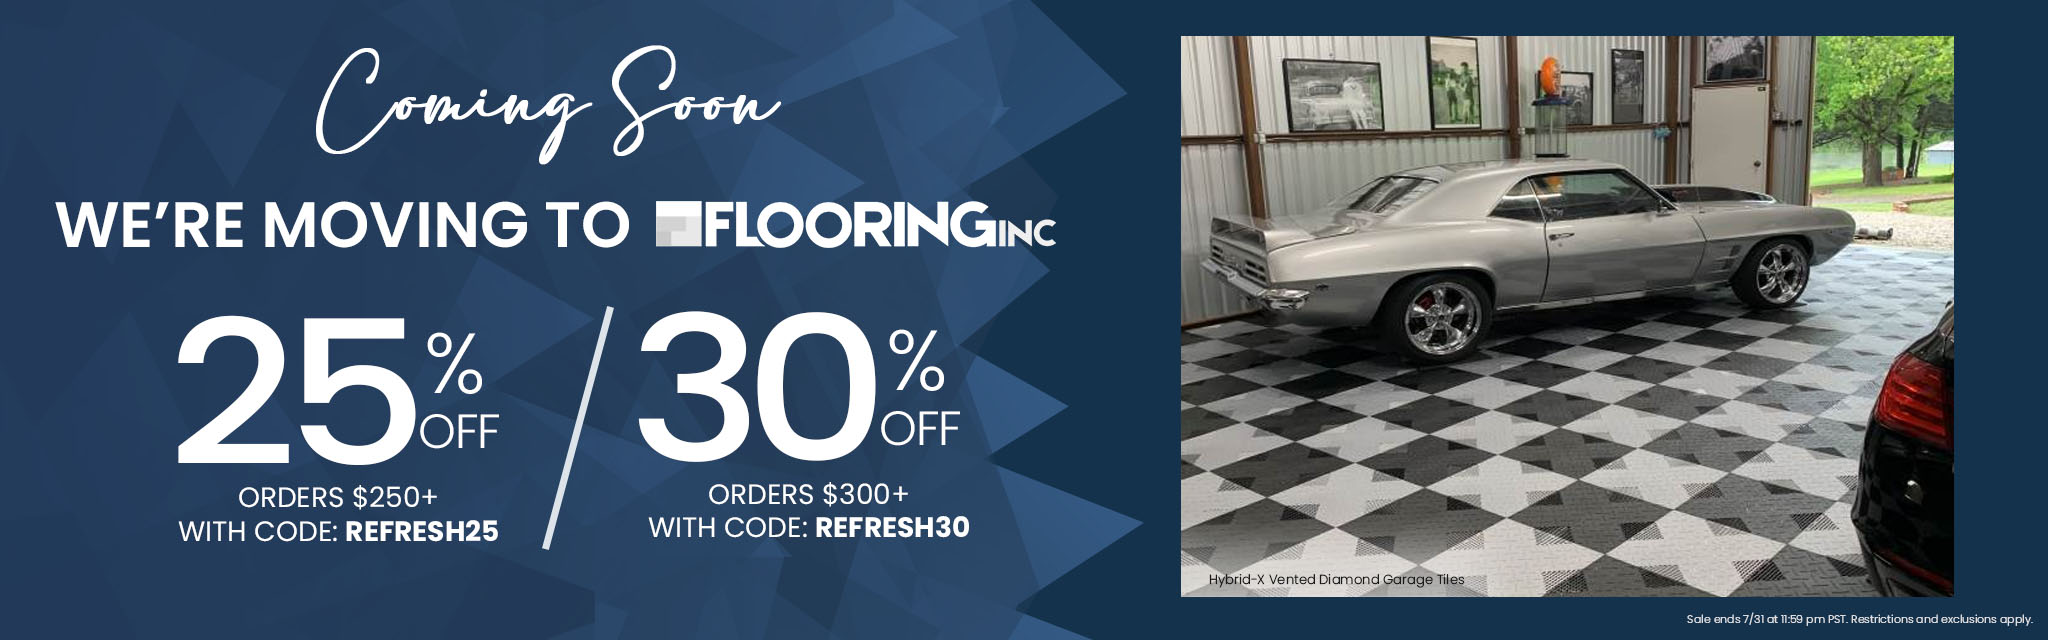 Coming Soon. We're Moving to Flooring Inc. 25% Off Orders $250 or more with code: REFERSH25 or 30% Off Orders $300 or more with code: REFRESH30. Sale ends 7/31 at 11:59pm PST. Restrictions and exclusions apply.